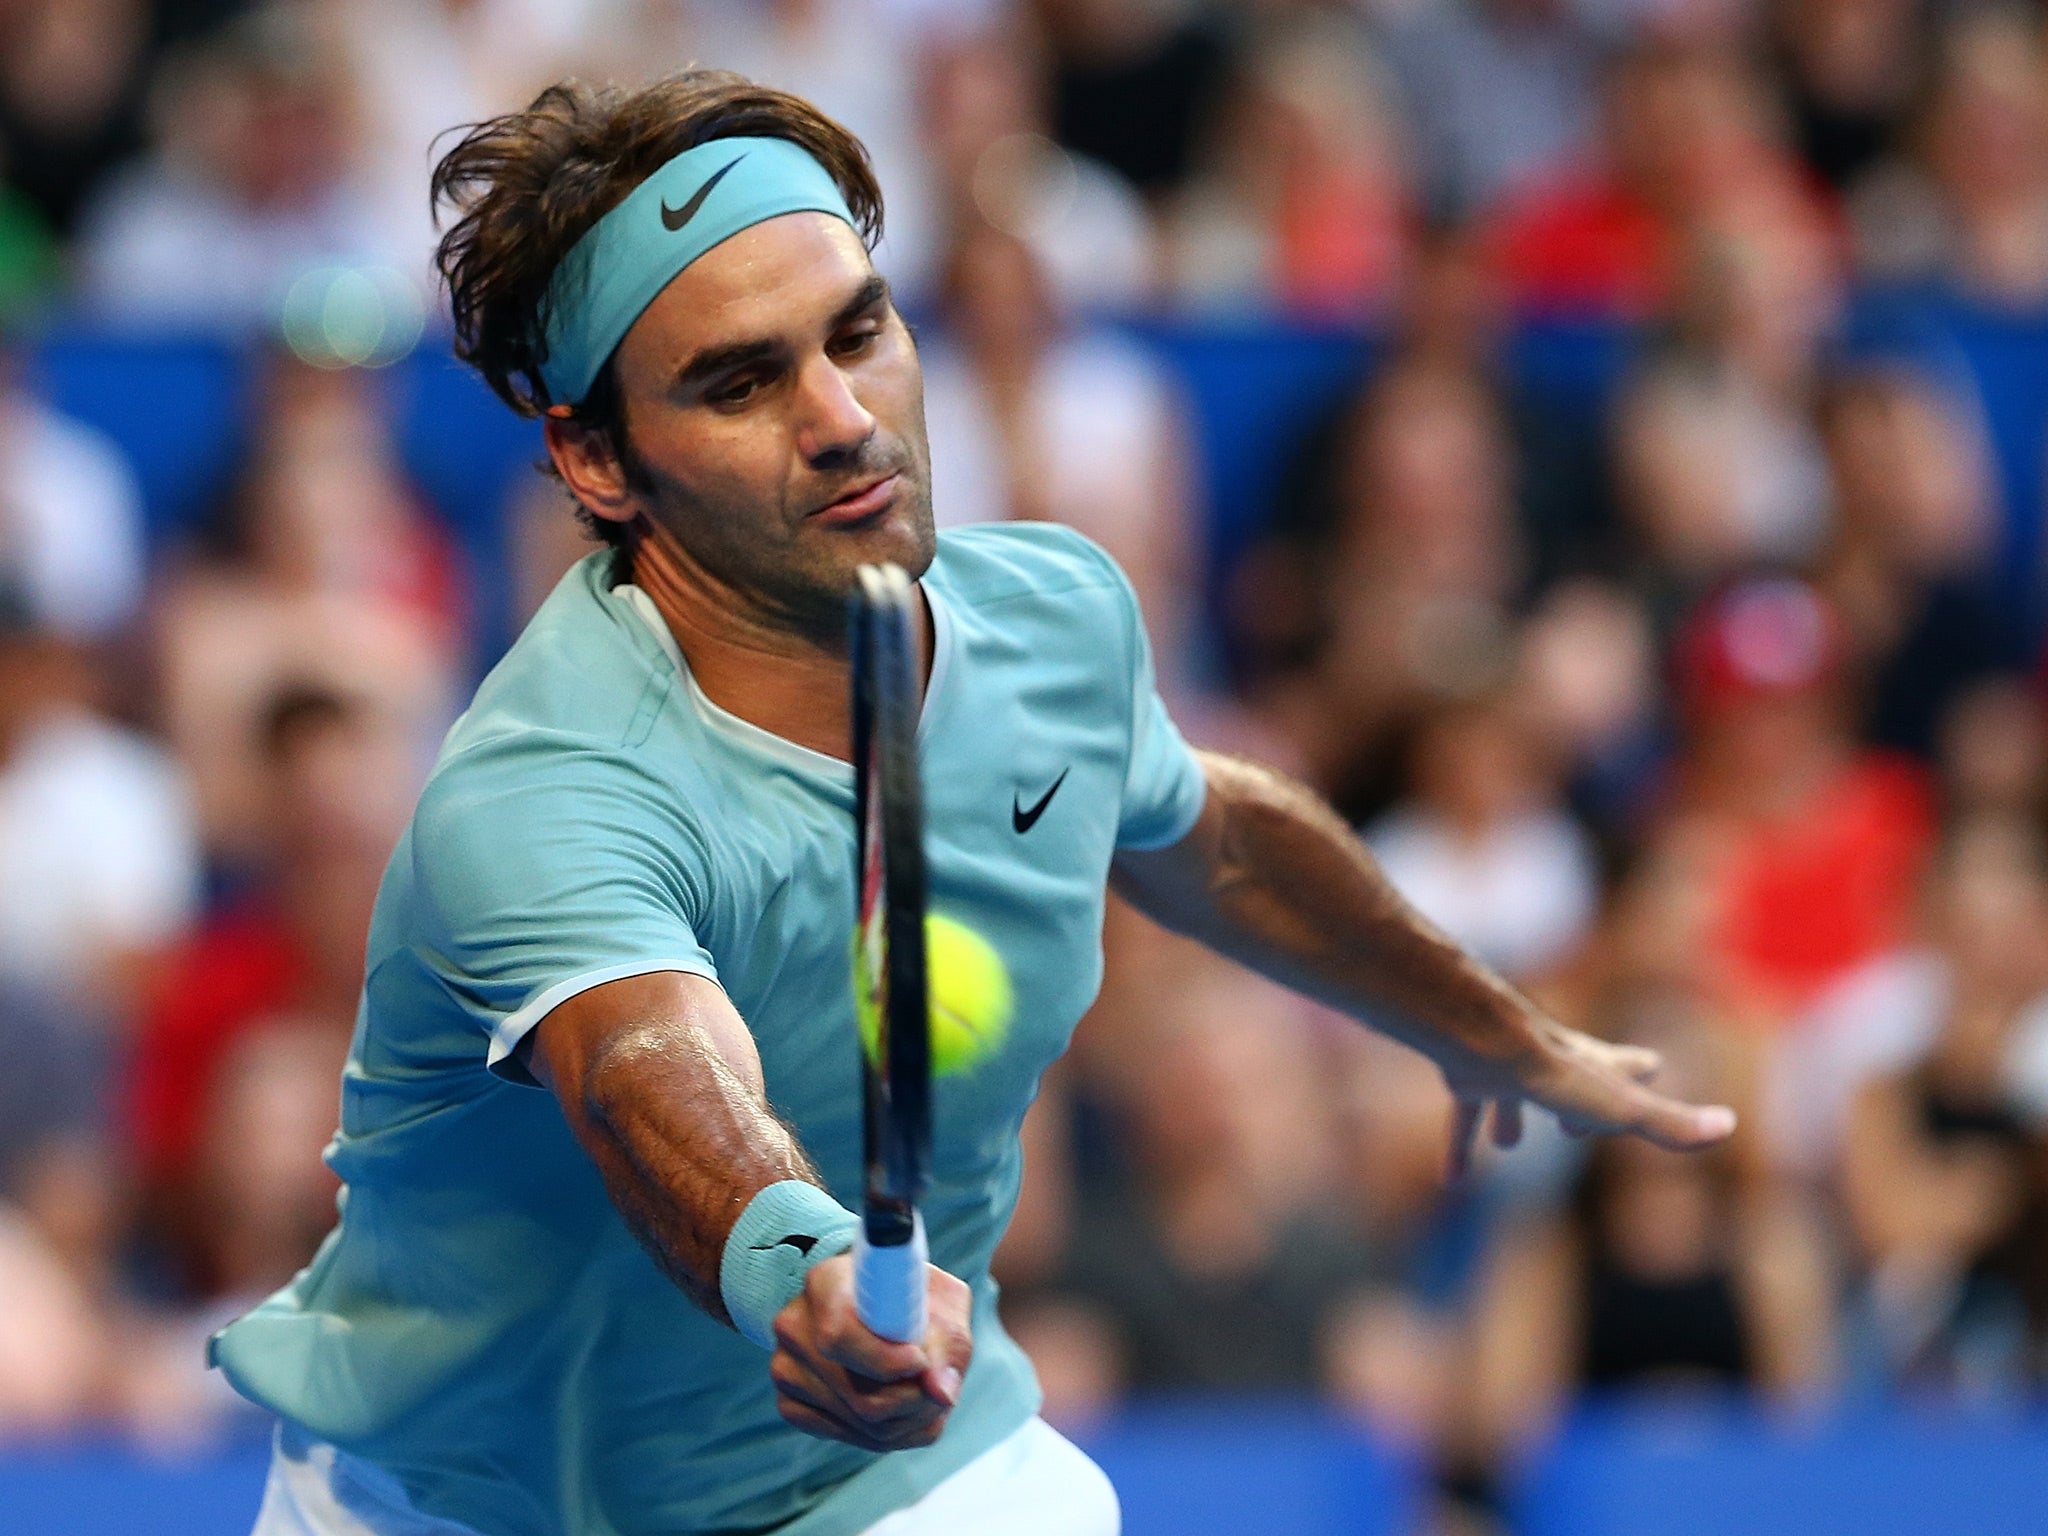 Federer's long-awaited comeback to tennis was a successful one